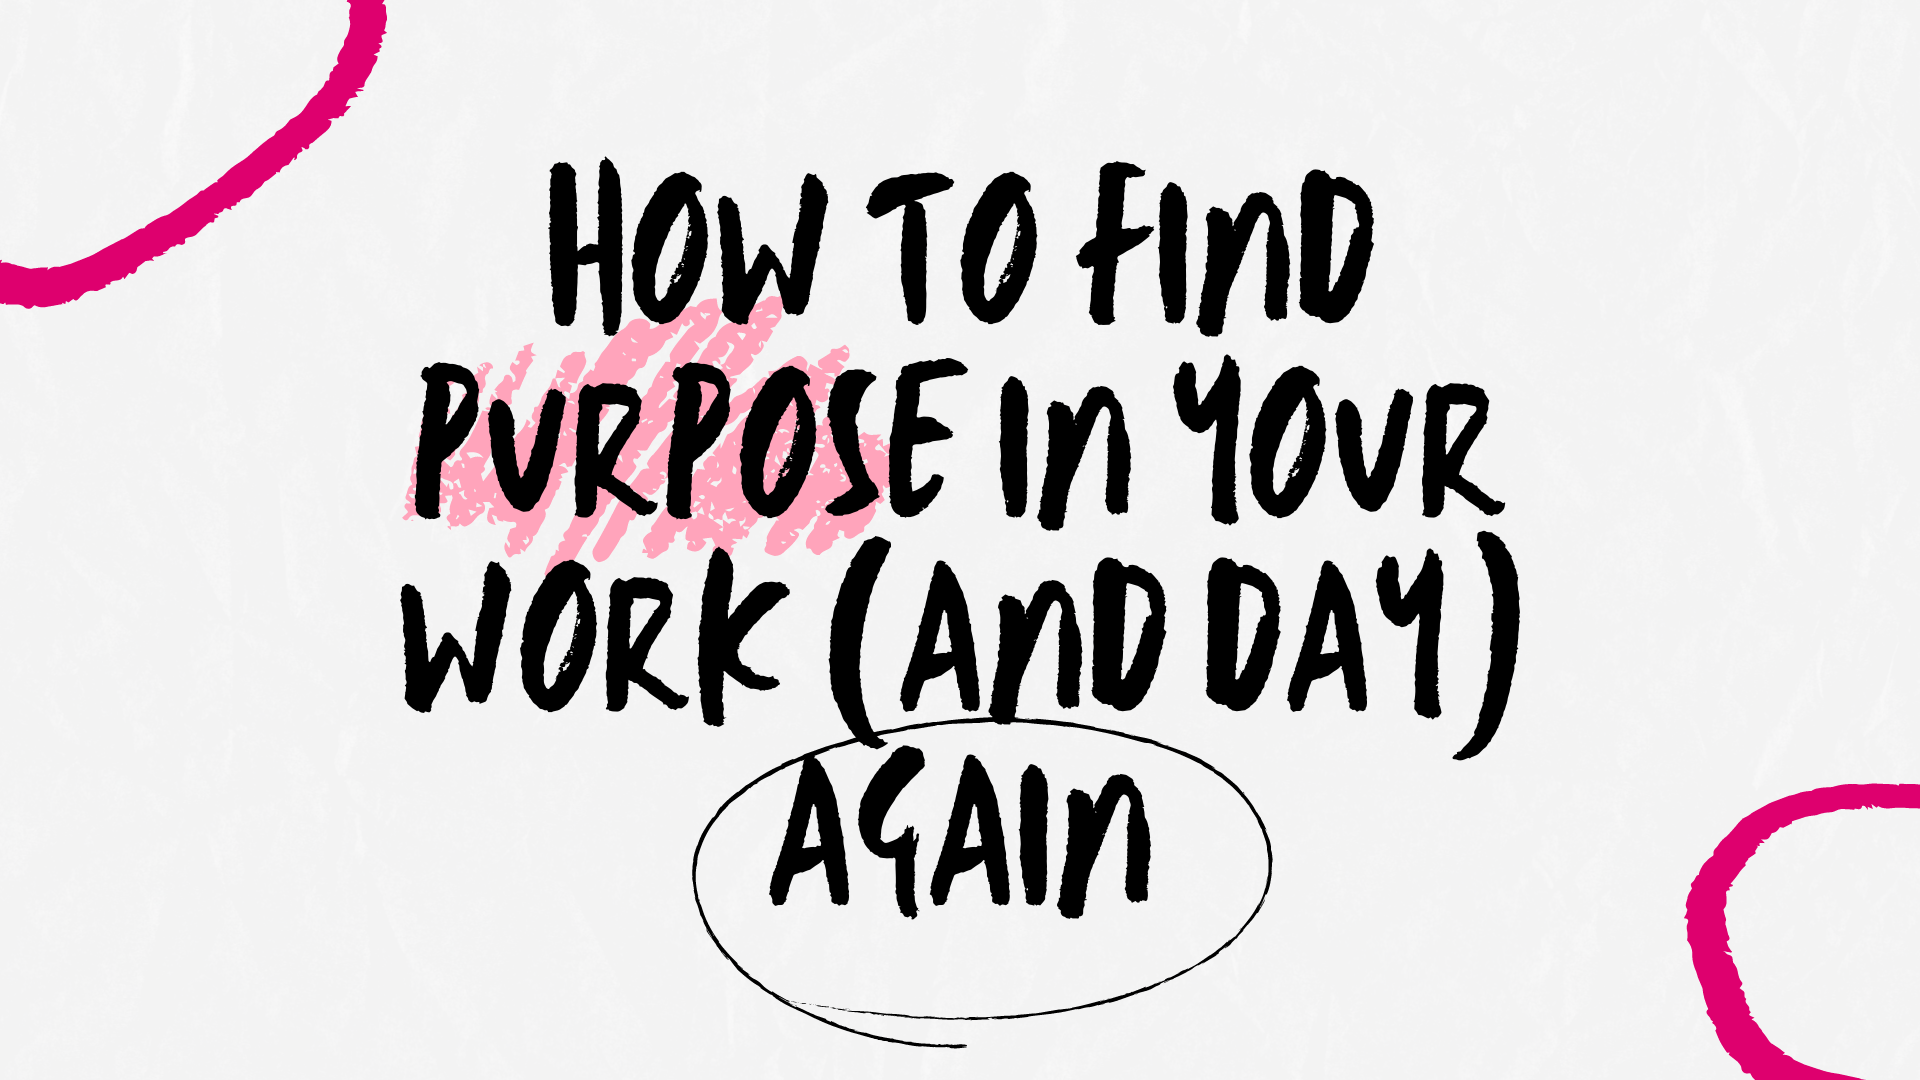 How to find purpose blog